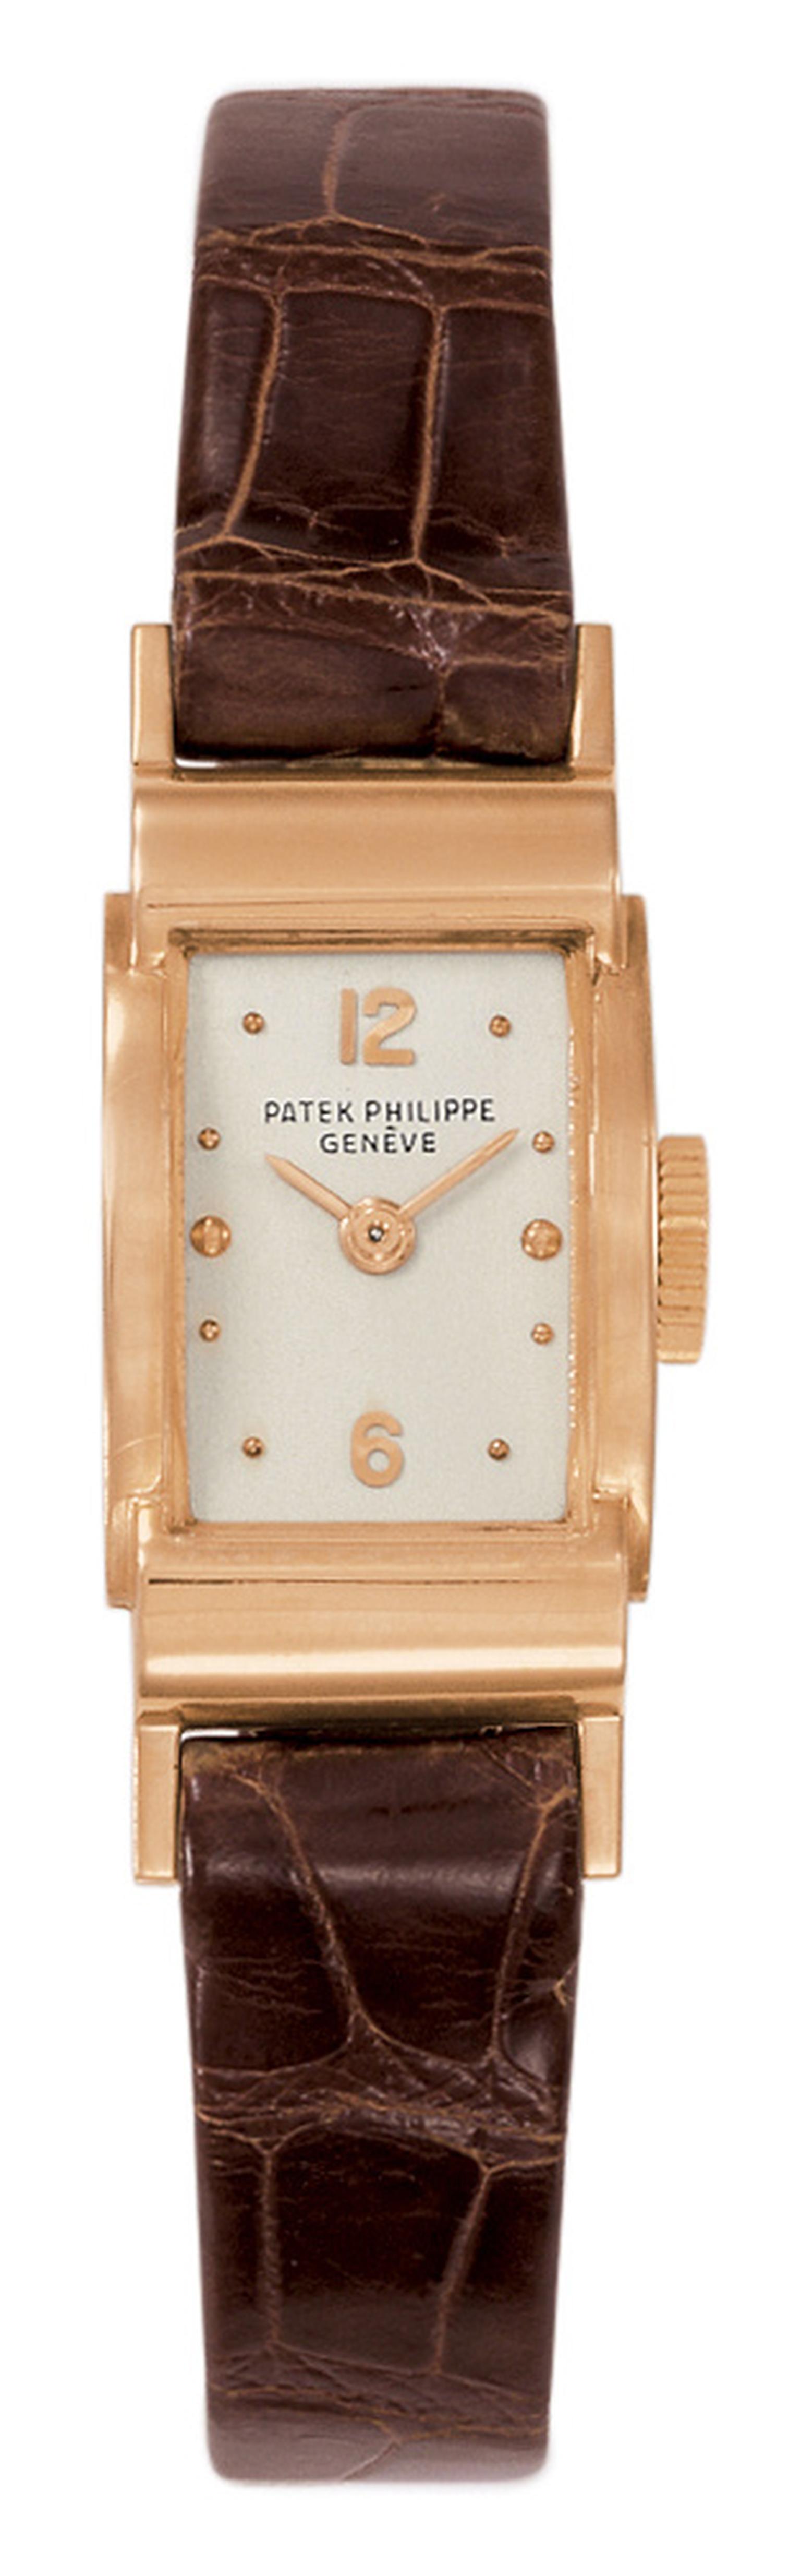 Patek-Philippe-P0530_a_100_collection-1940-60.jpg